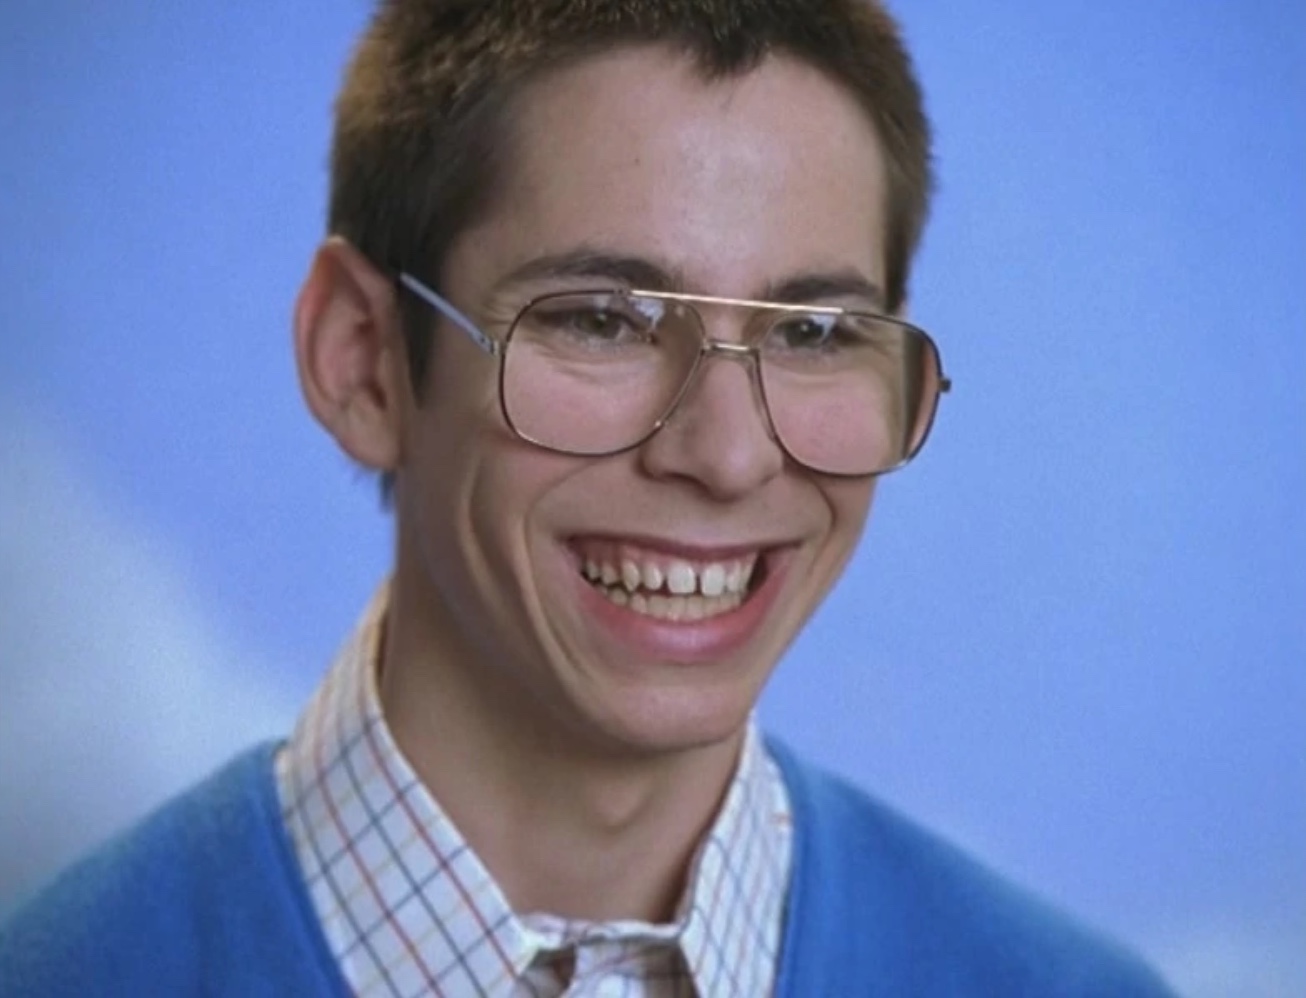 A still of Bill taken from Freaks and Geeks' fun intro sequence.